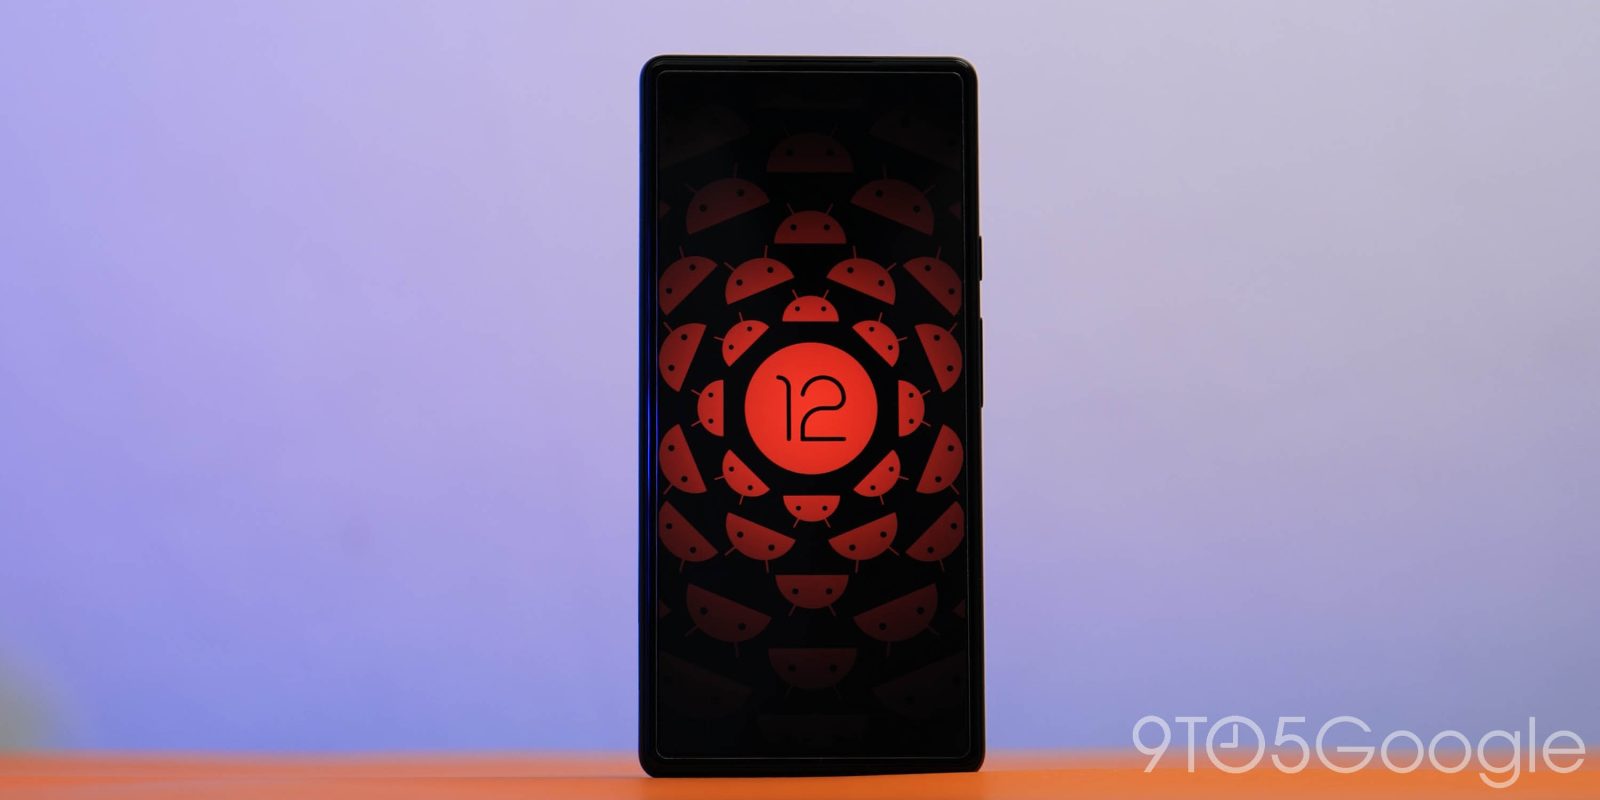 Android 12L logo in red